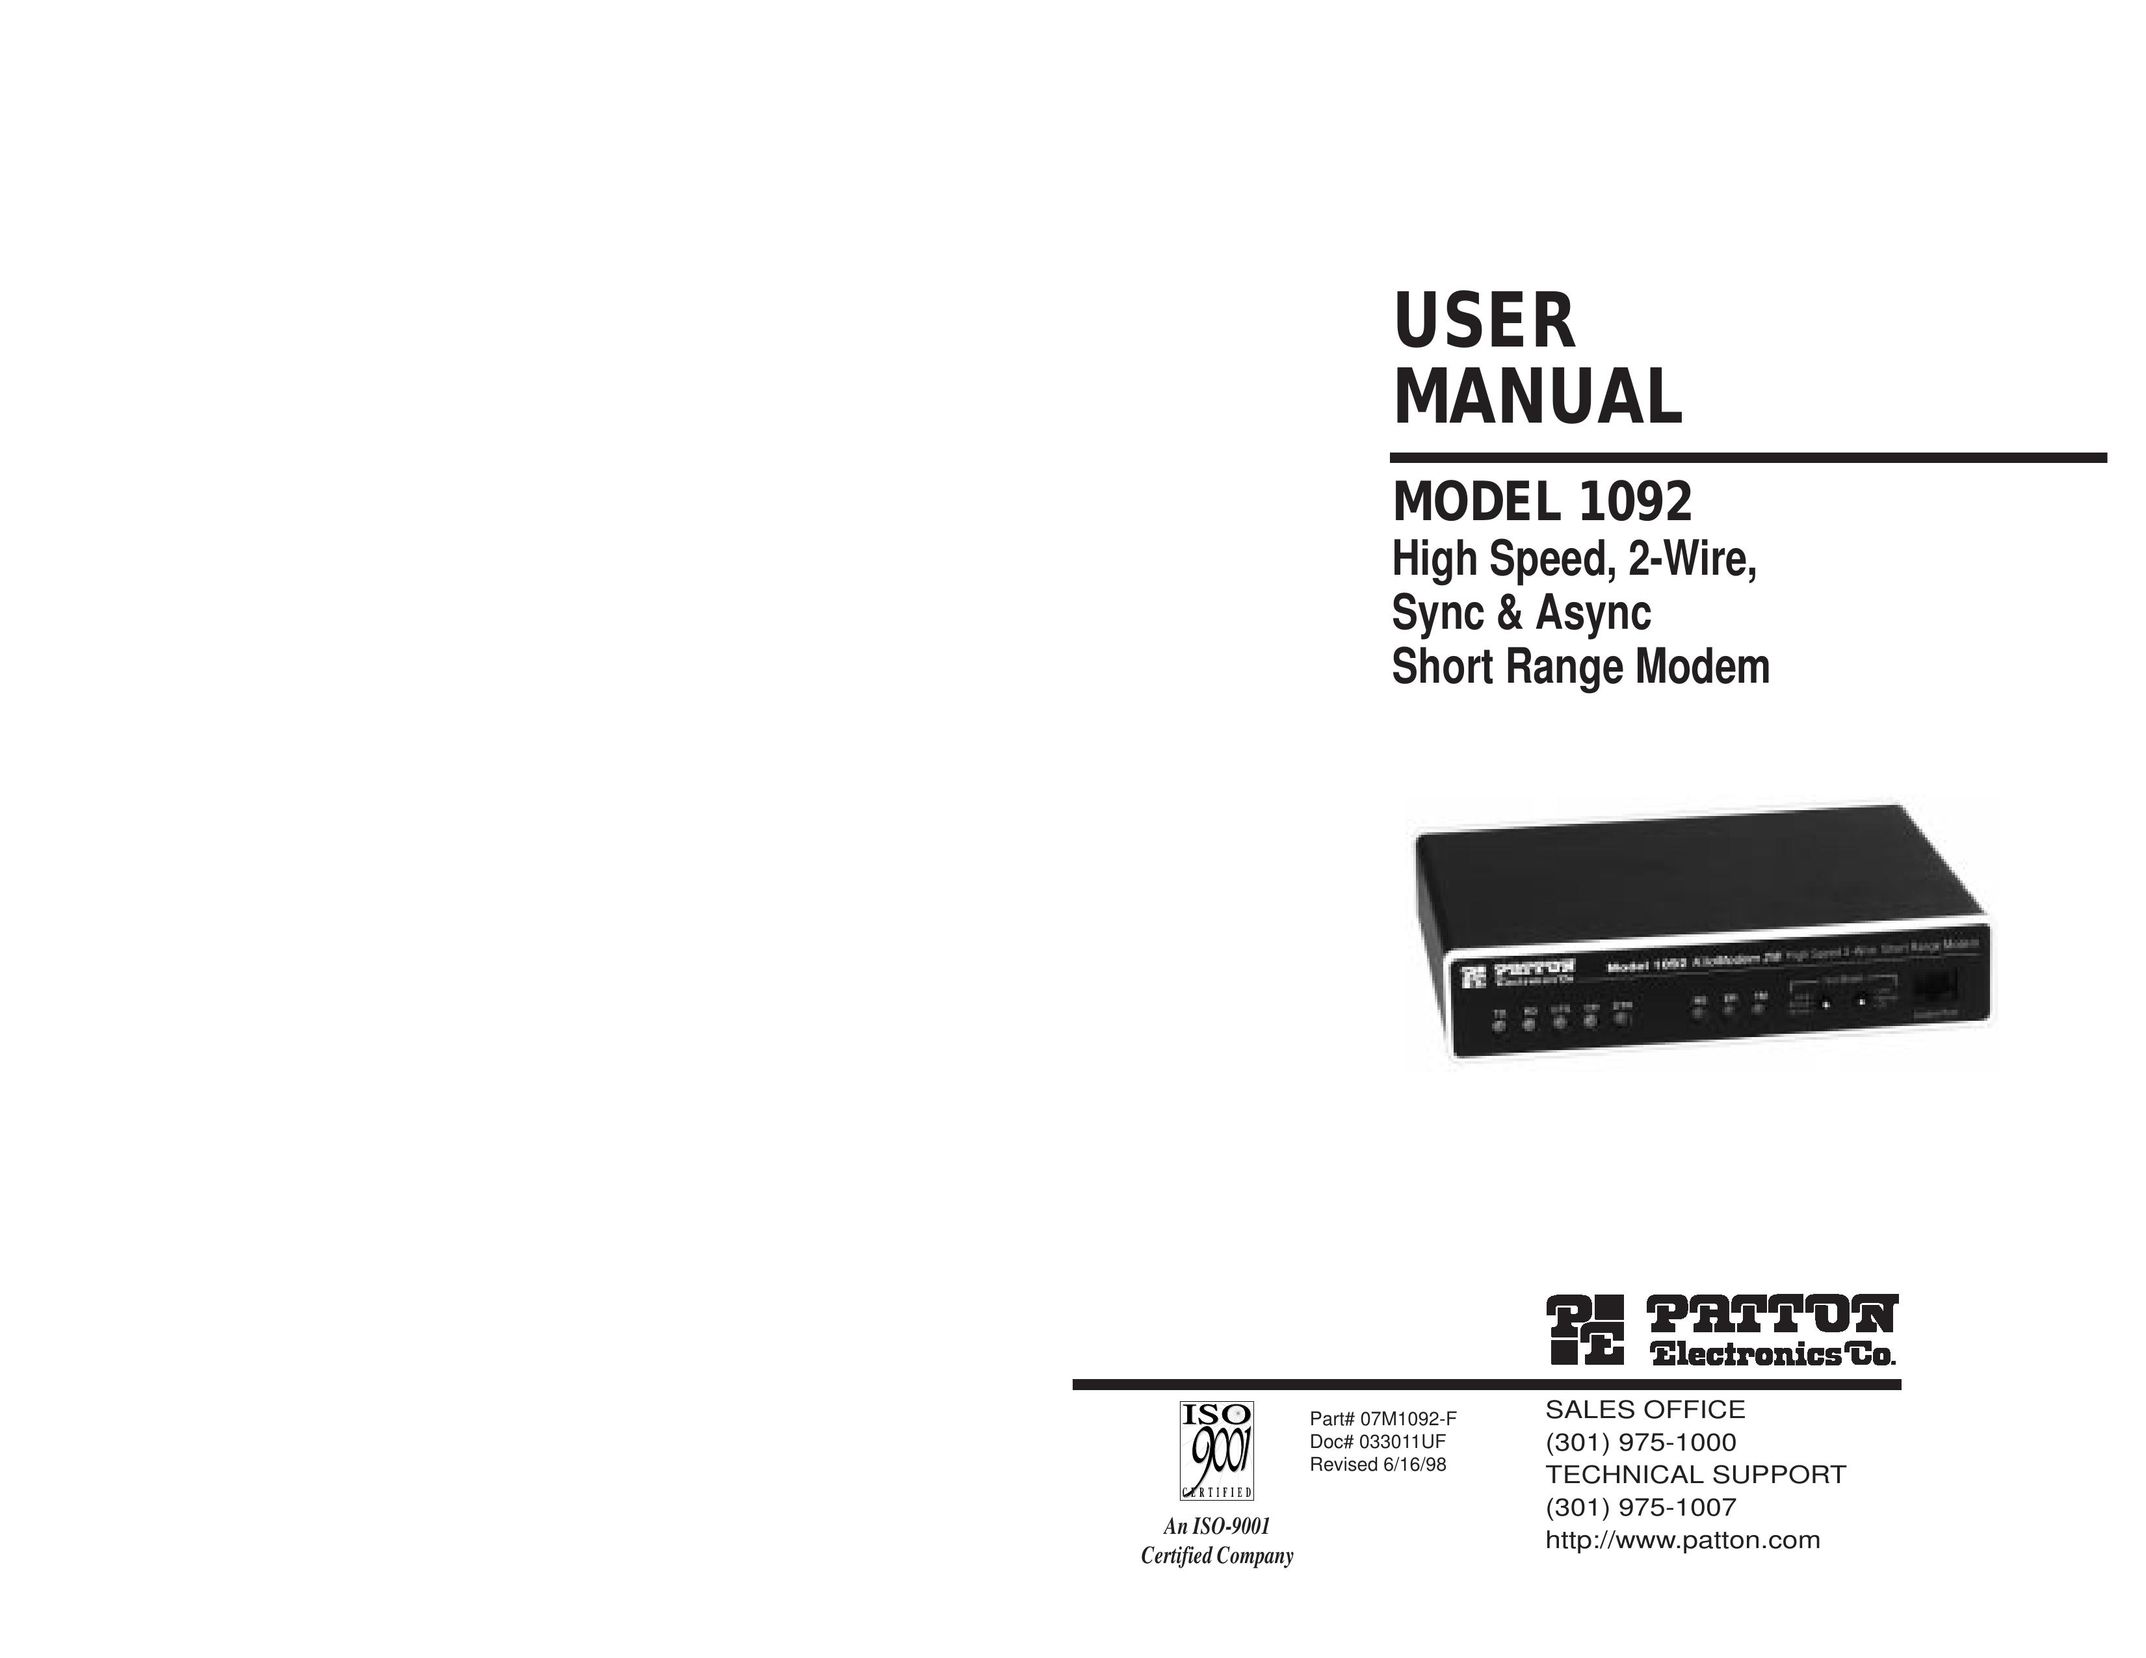 Patton electronic 1092 Network Card User Manual